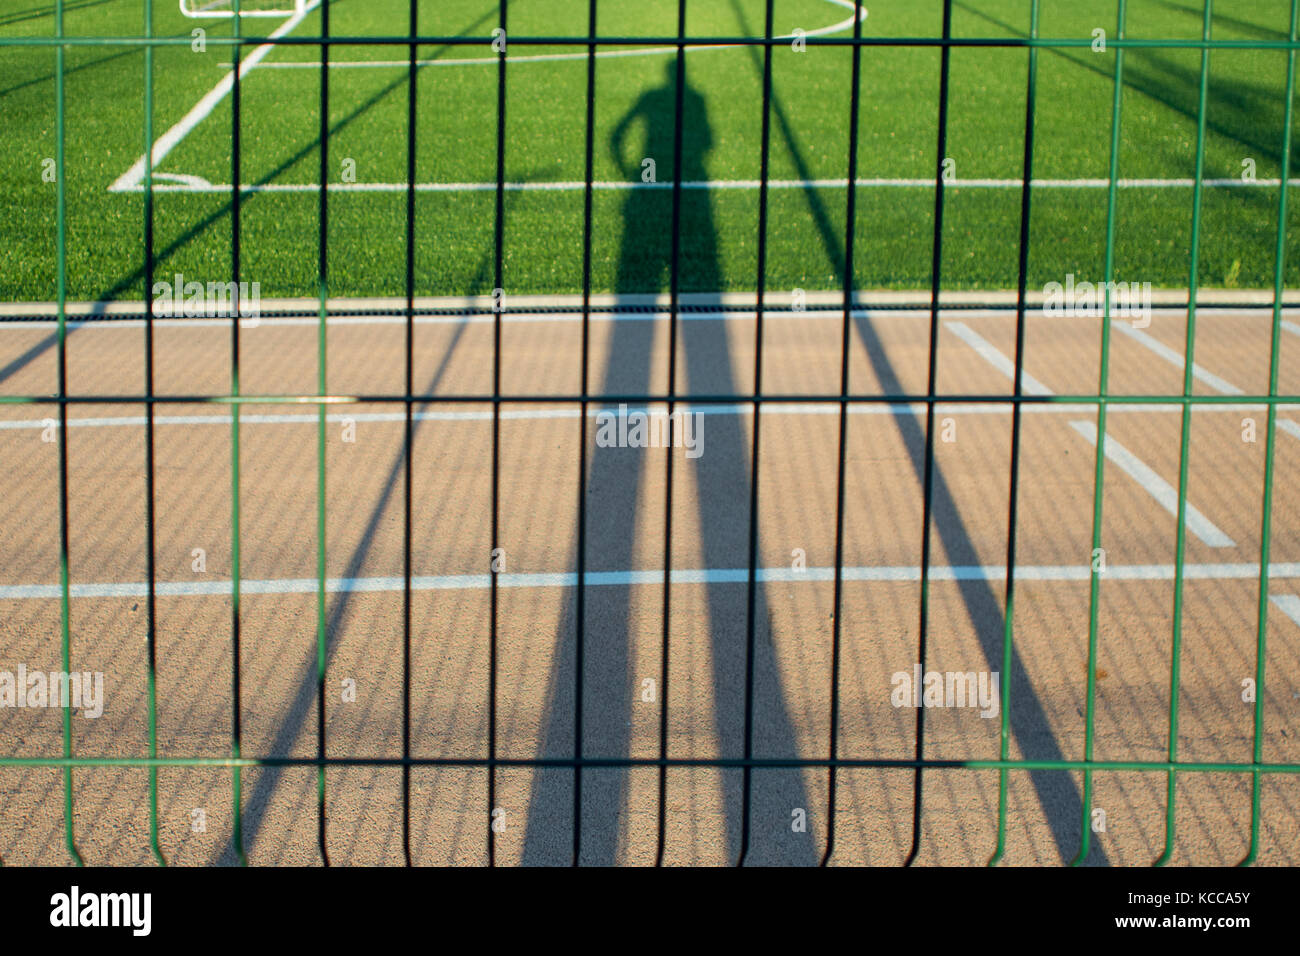 Want to play sports, the person watching the Playground through the fence, shadow Stock Photo